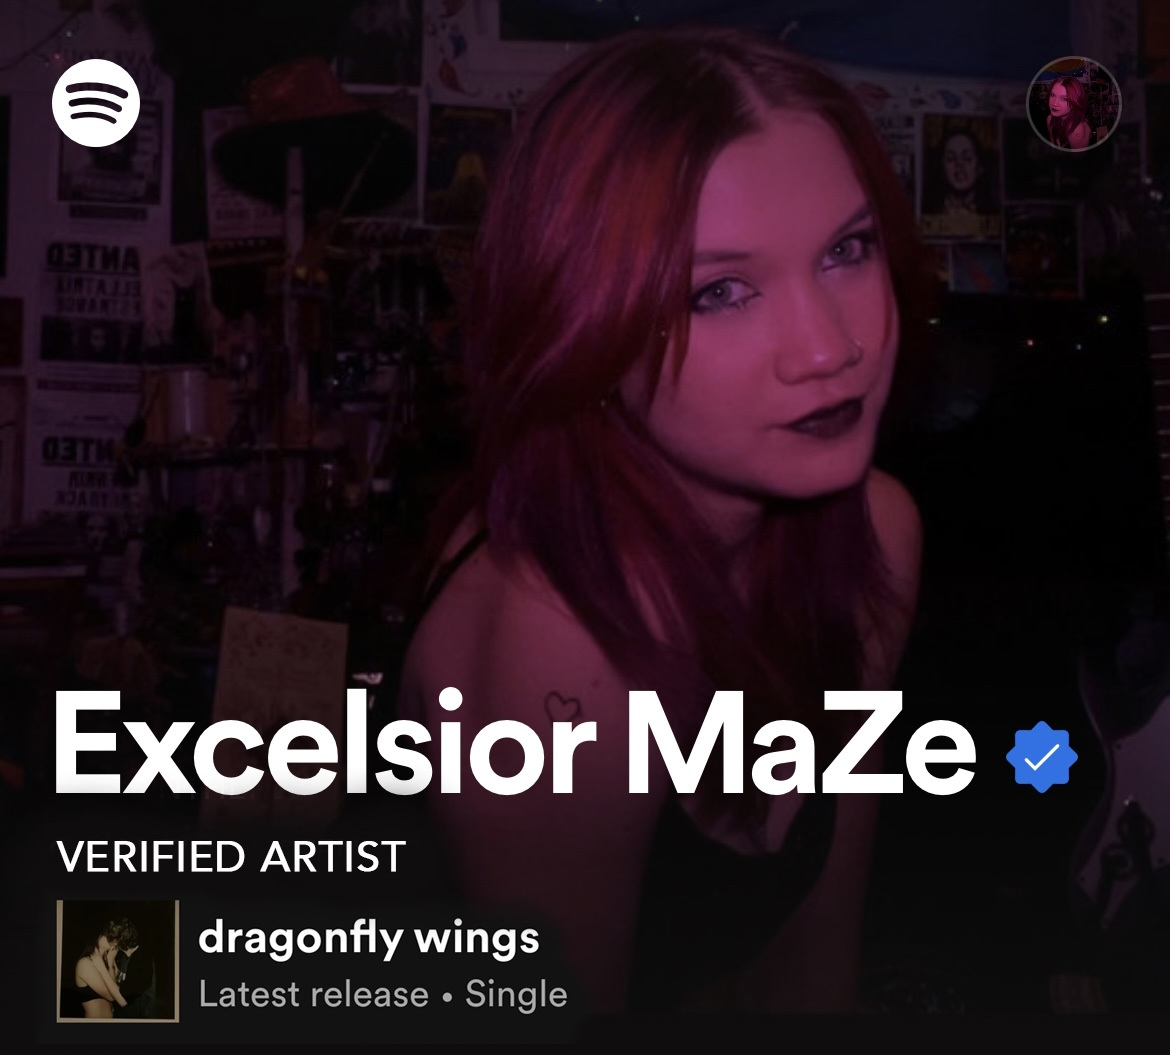 Excelsior Maze's single 'Dragonfly Wings' - recorded at Soundstep Studios